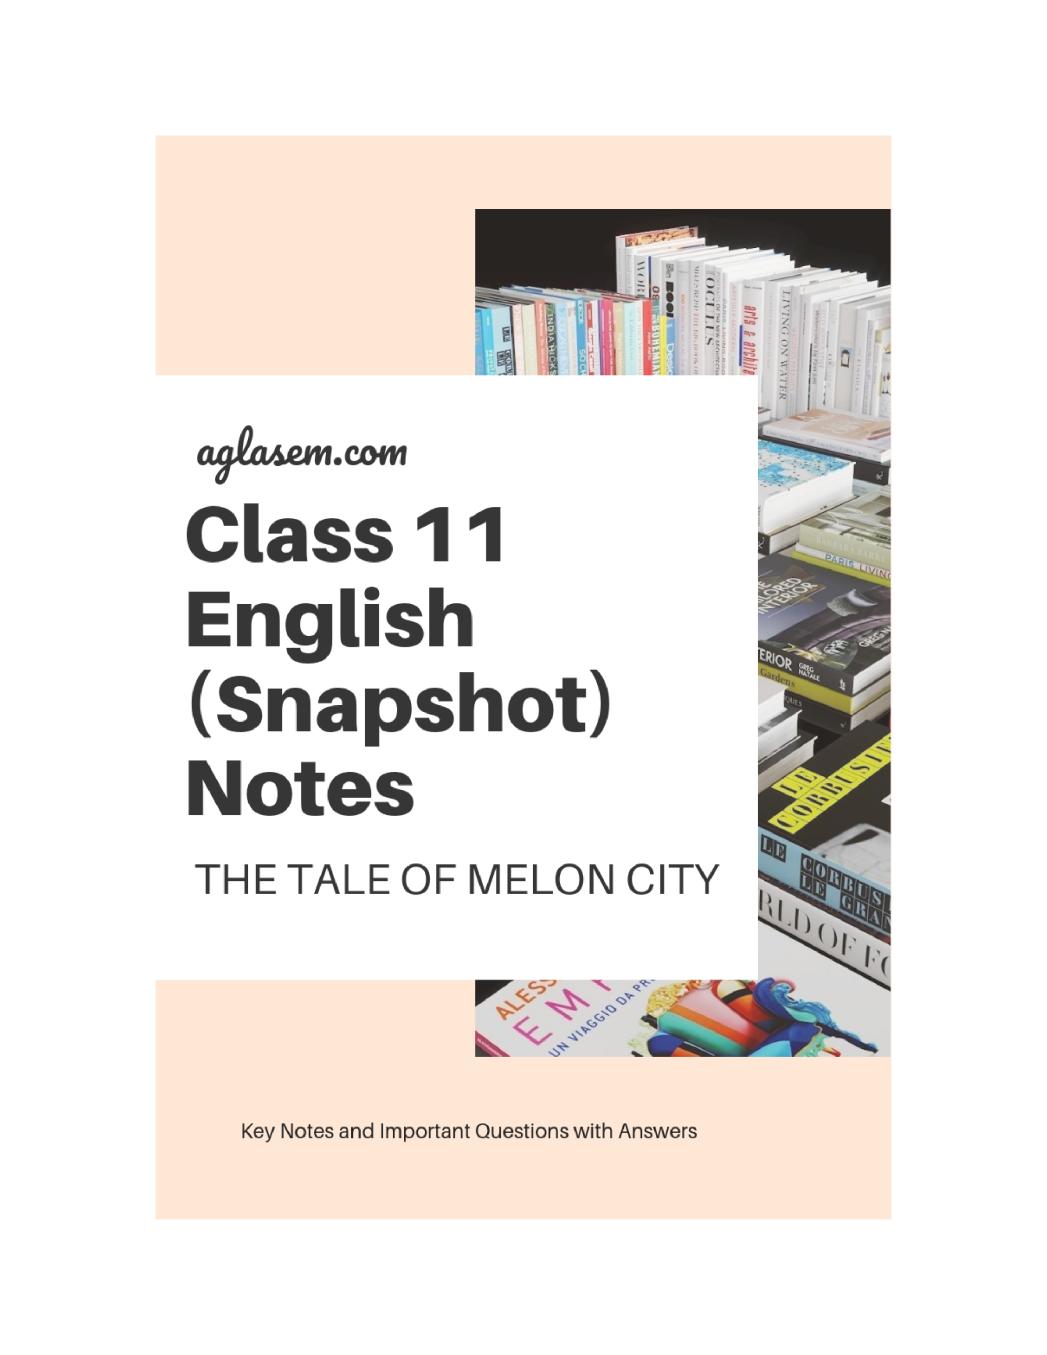 Class 11 English Snapshot Notes For The Tale of Melon City - Page 1